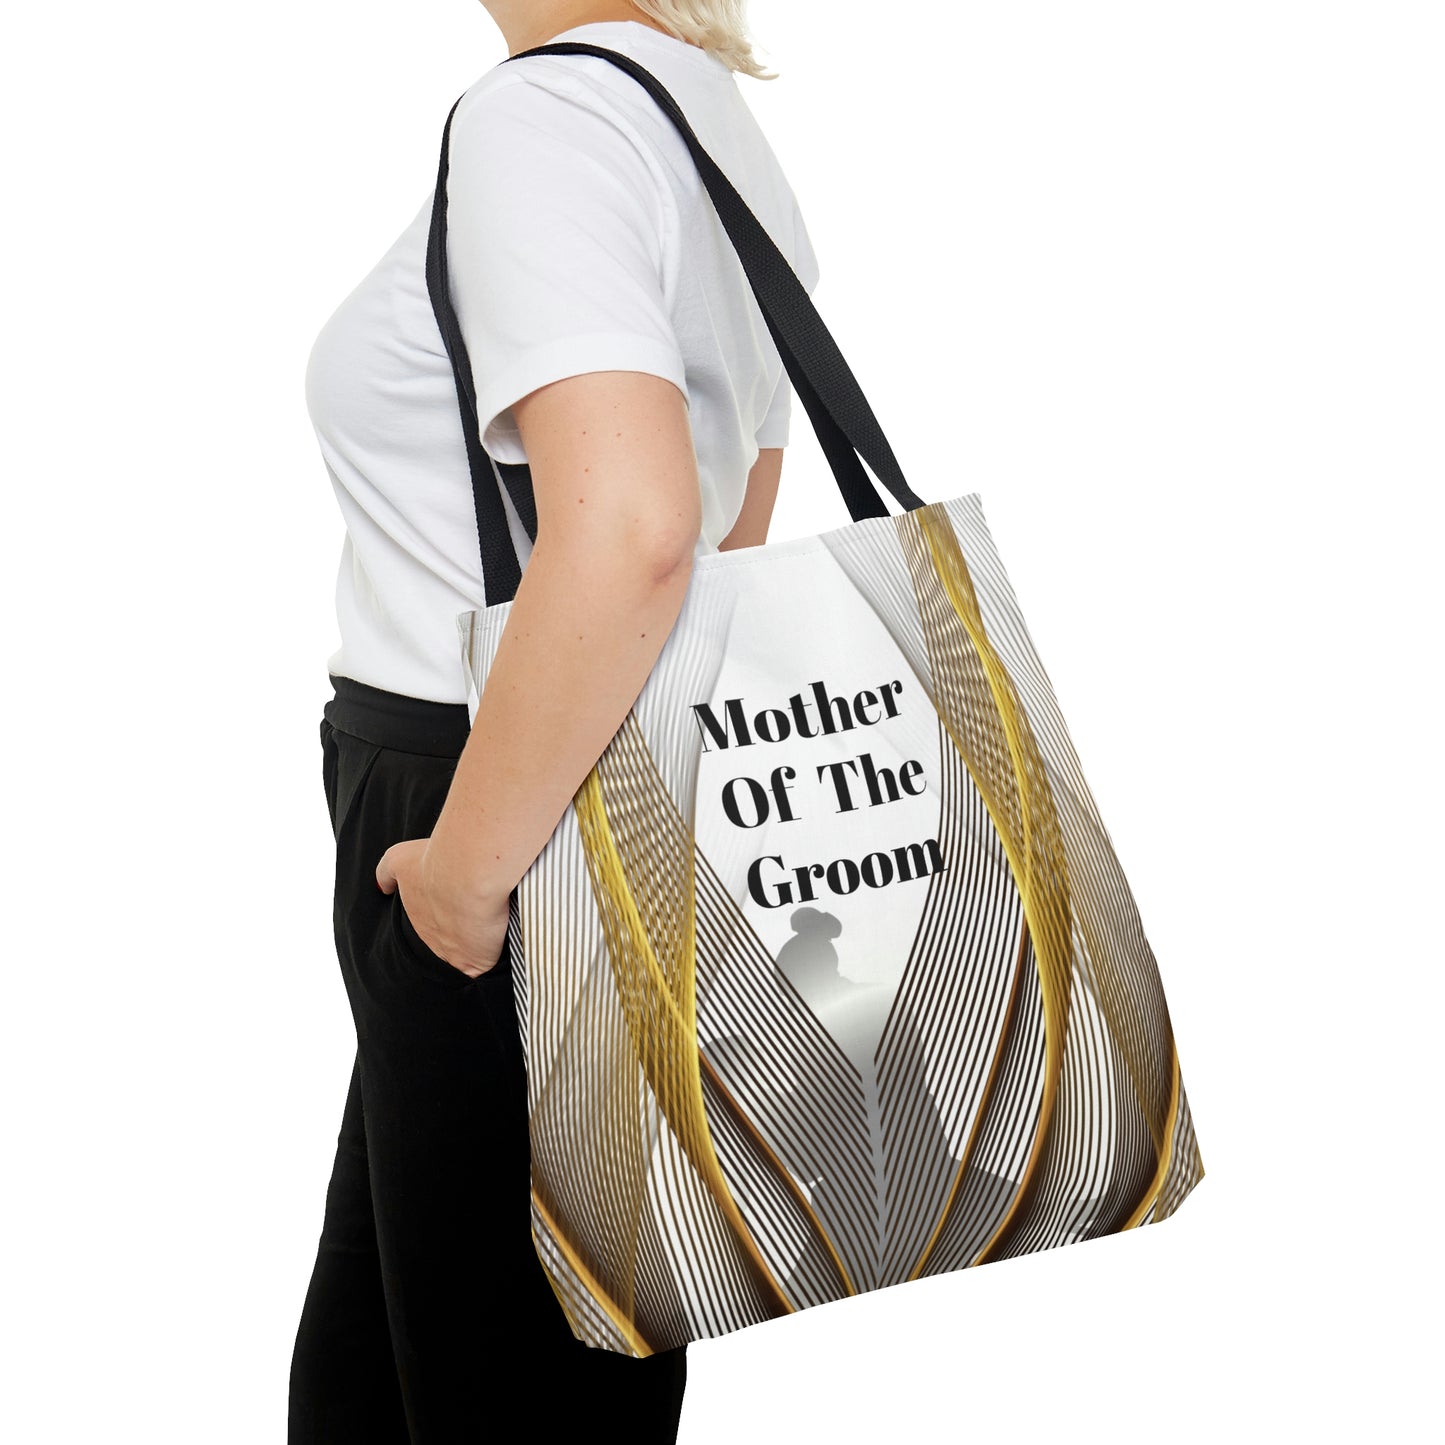 Mother Of The Groom Gift Bag | White Tote | Practical Wedding Gift | Bridal Shower Gifts